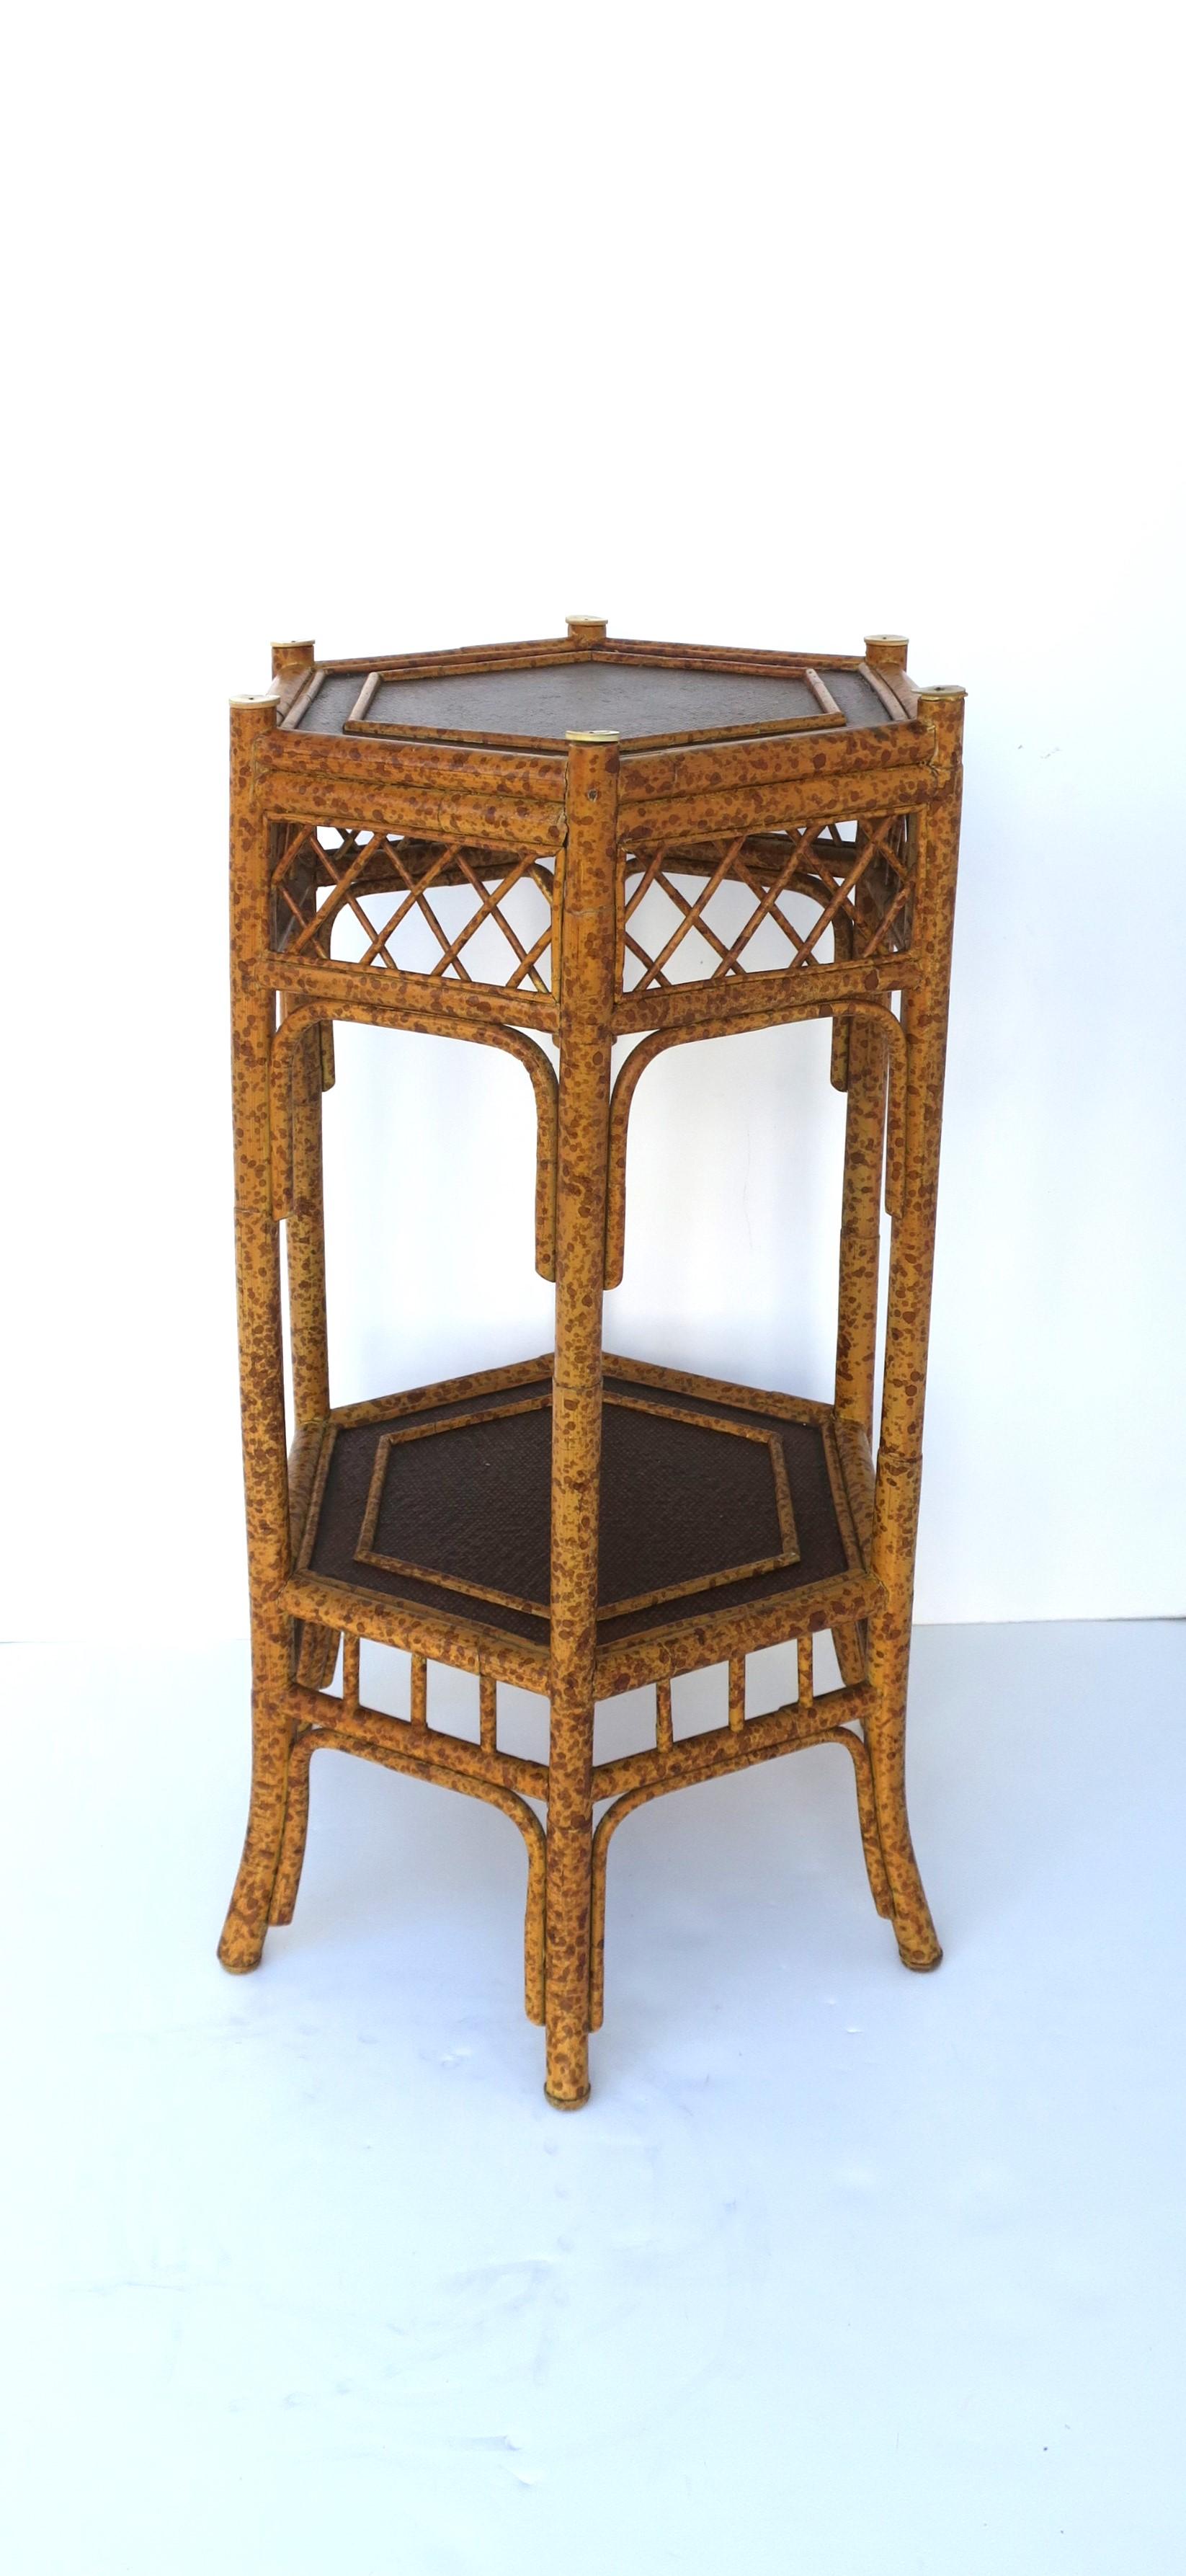 Philippine Bamboo-Esque Wicker Accent Side Table with Shelf by Maitland-Smith For Sale